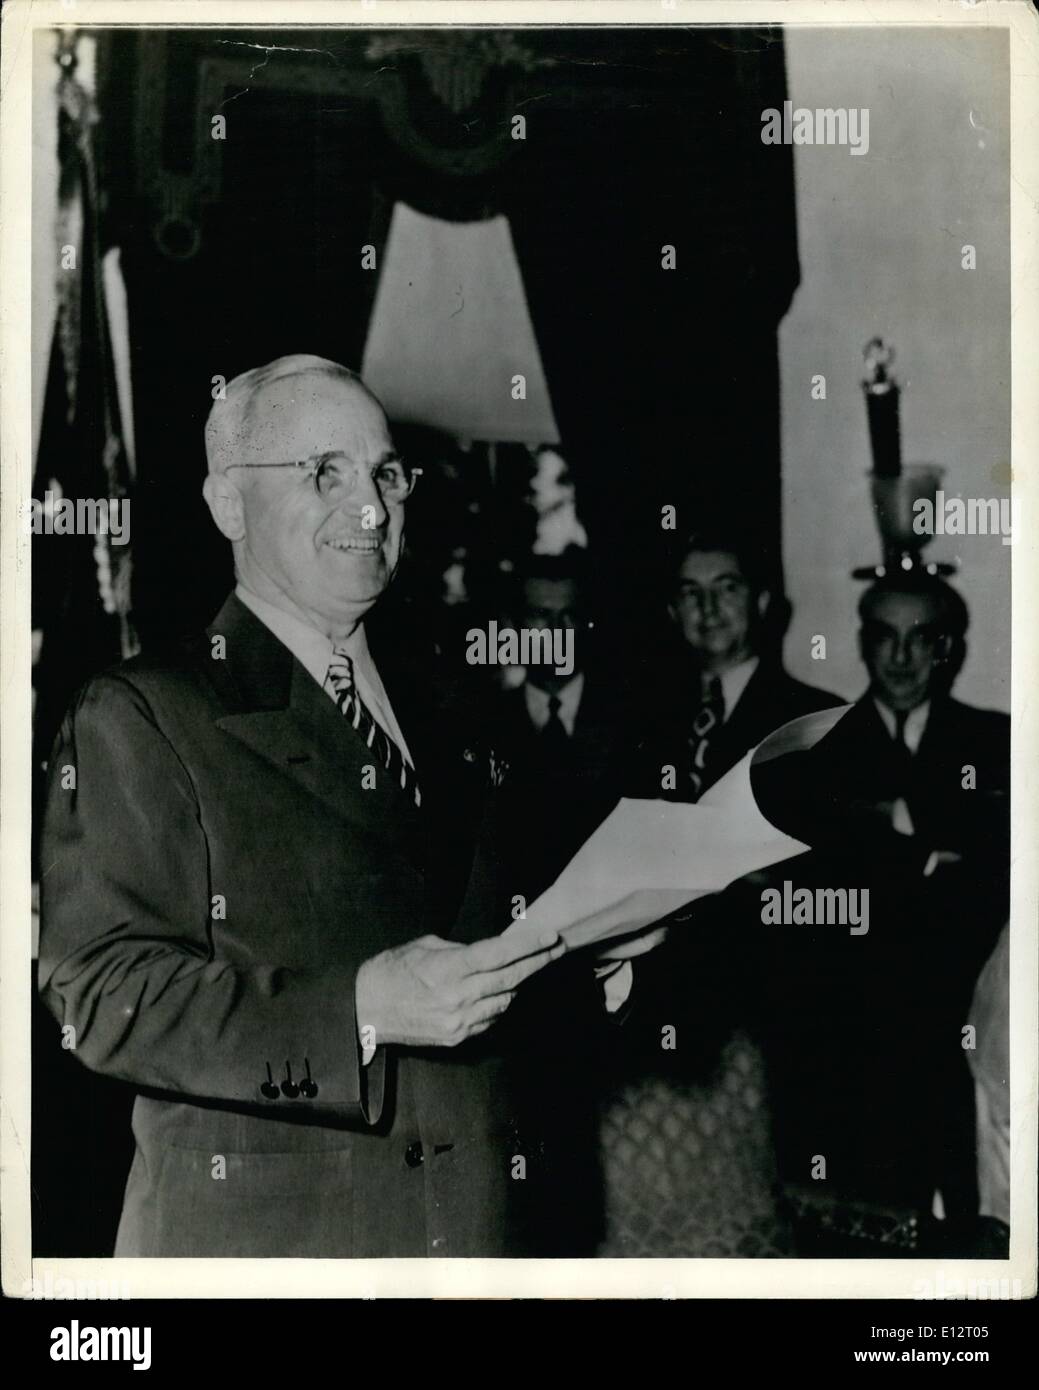 Feb. 24, 2012 - Watch Your Credit International News Photo Slug (Truman): Glad Tidings - Truman Announces End Of The War. Washington, D.C. Wearing His Biggest Smile President Harry S. Truman Reads His Declaration Of Peace Following Receipt Of The Japanese Acceptance Of Surrender Terms. This Was At 7pm Today. Newsmen Who Had Kept Days'-Long Vigil At The White House Were On Hand For The Great Moment. Stock Photo